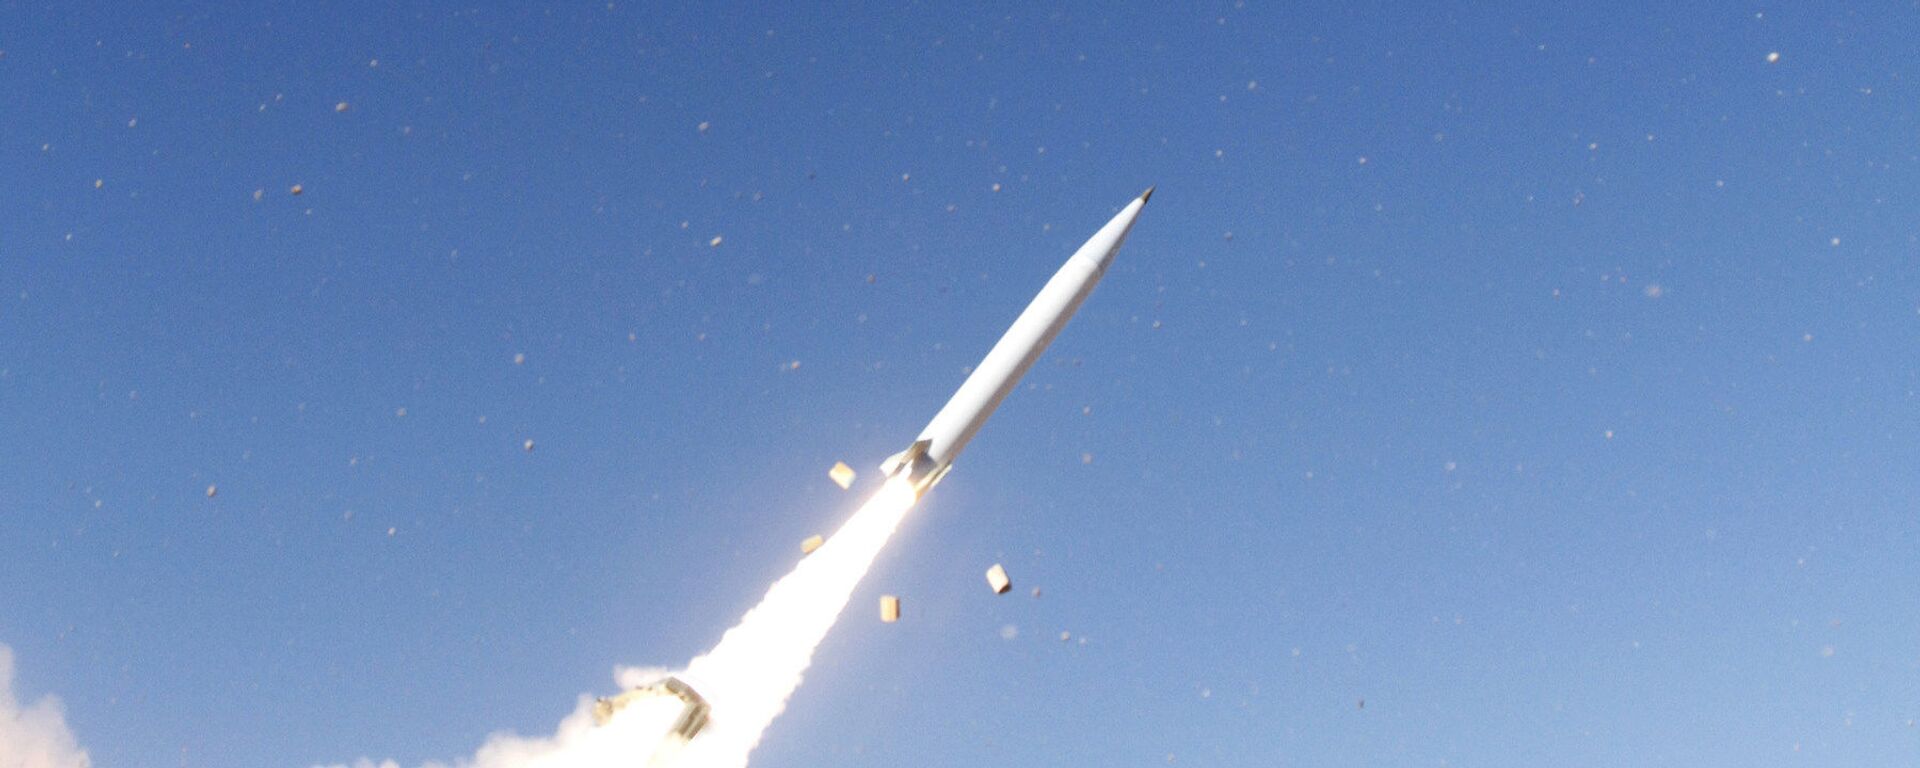 Lockheed Martin’s next-generation long-range missile demonstrates precision and reliability in its third consecutive test April 30, following a highly accurate demonstration March 10 and equally successful inaugural flight on Dec. 10, 2019, - Sputnik International, 1920, 18.02.2023